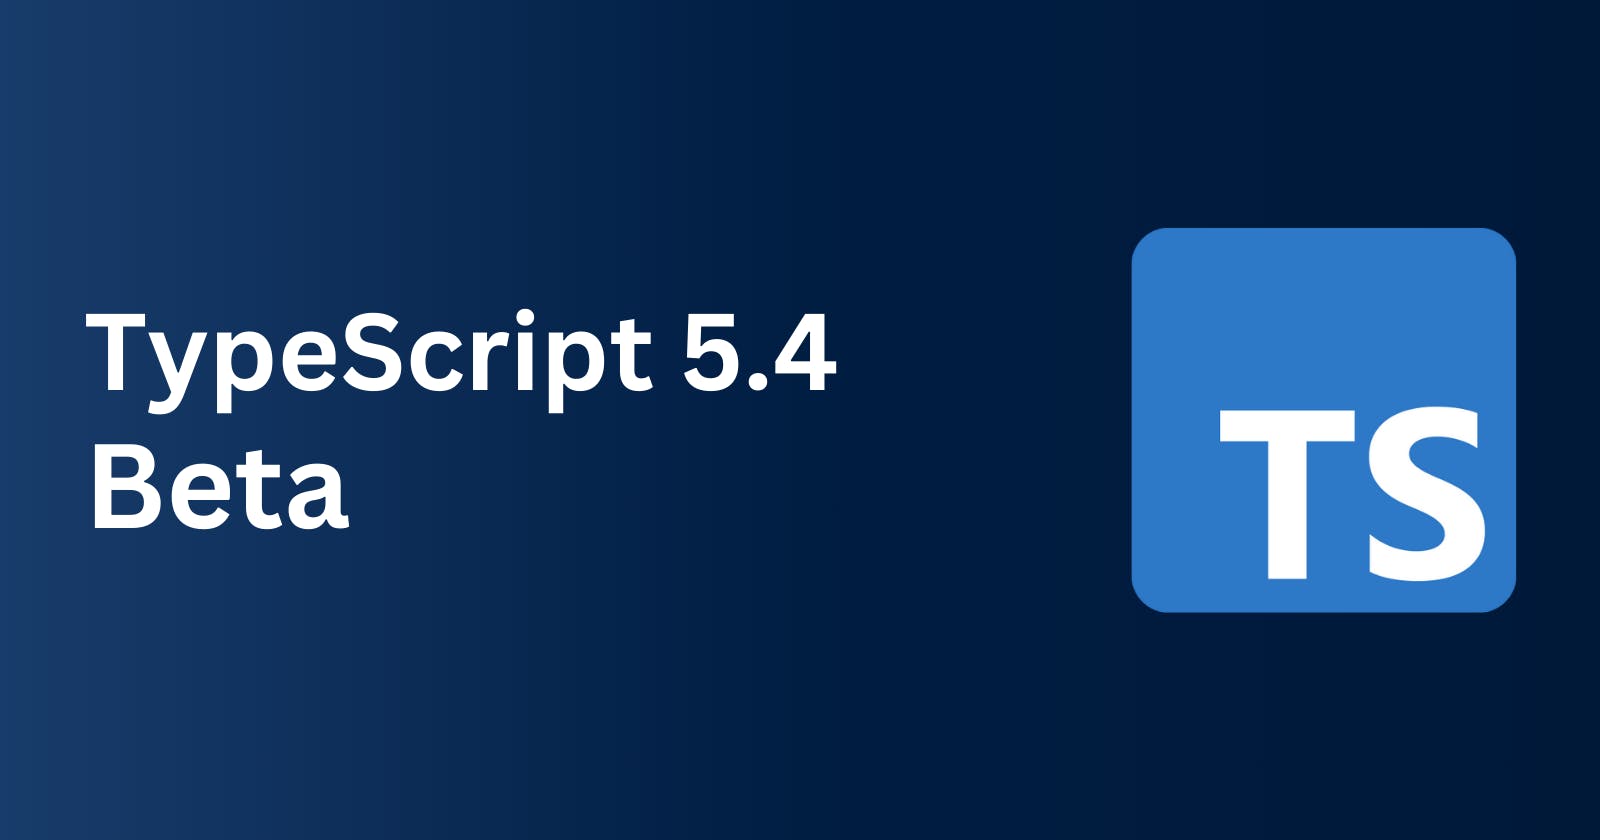 Cover Image for What's New in TypeScript 5.4 Beta